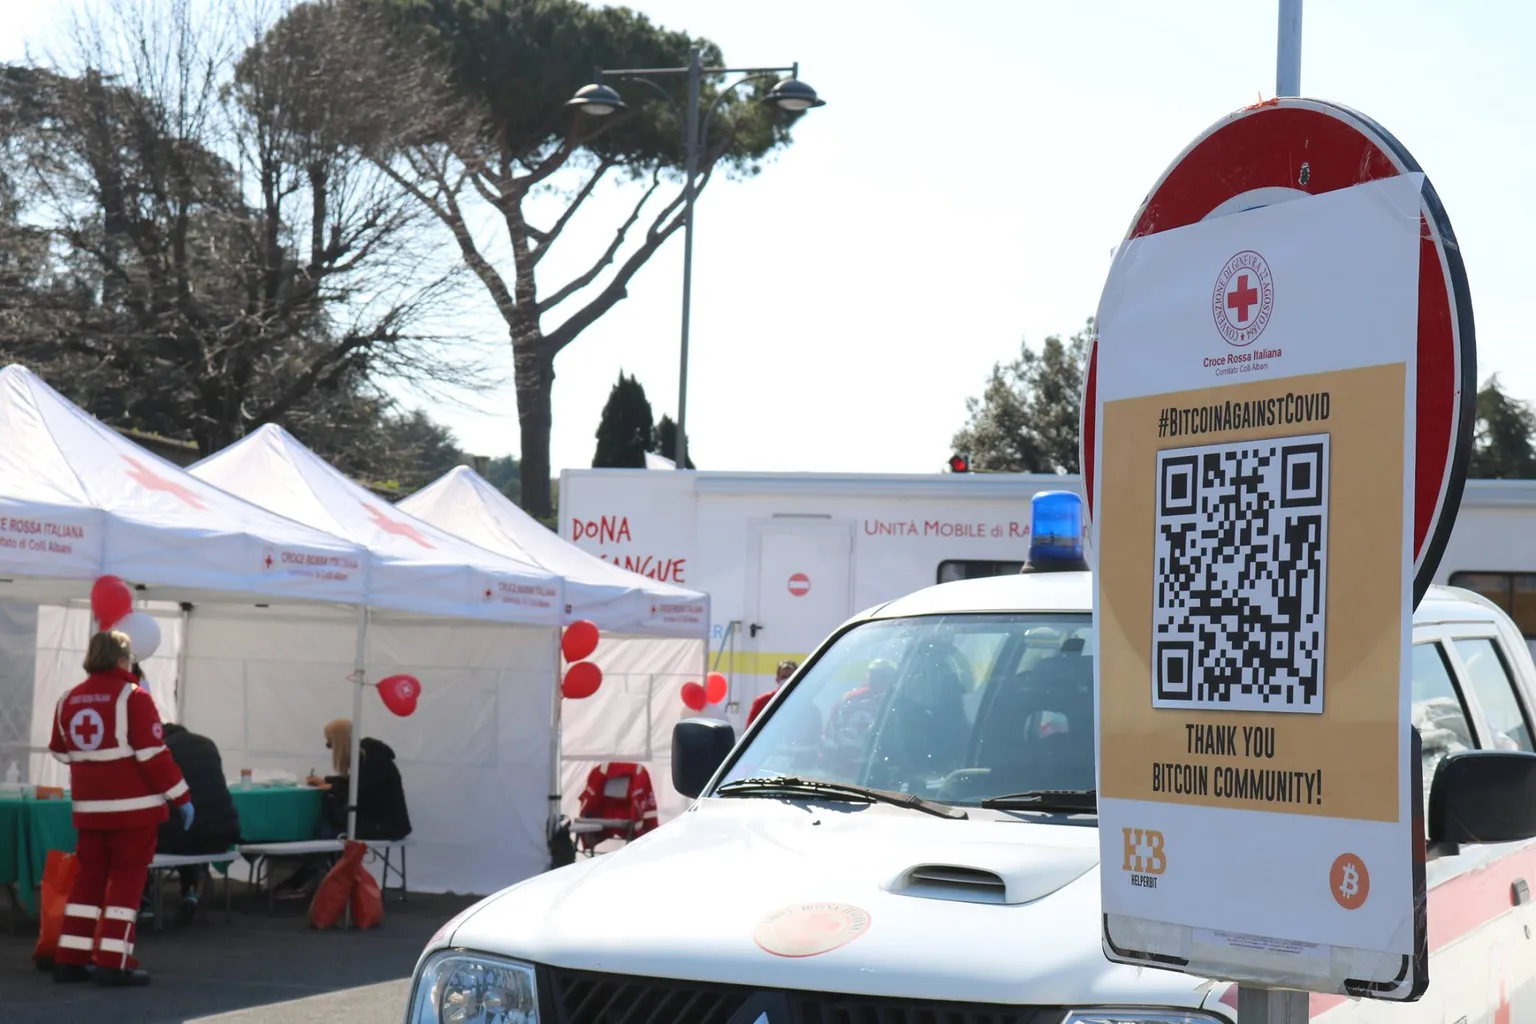 COVID-19: Bitcoin donations fund Red Cross medical post